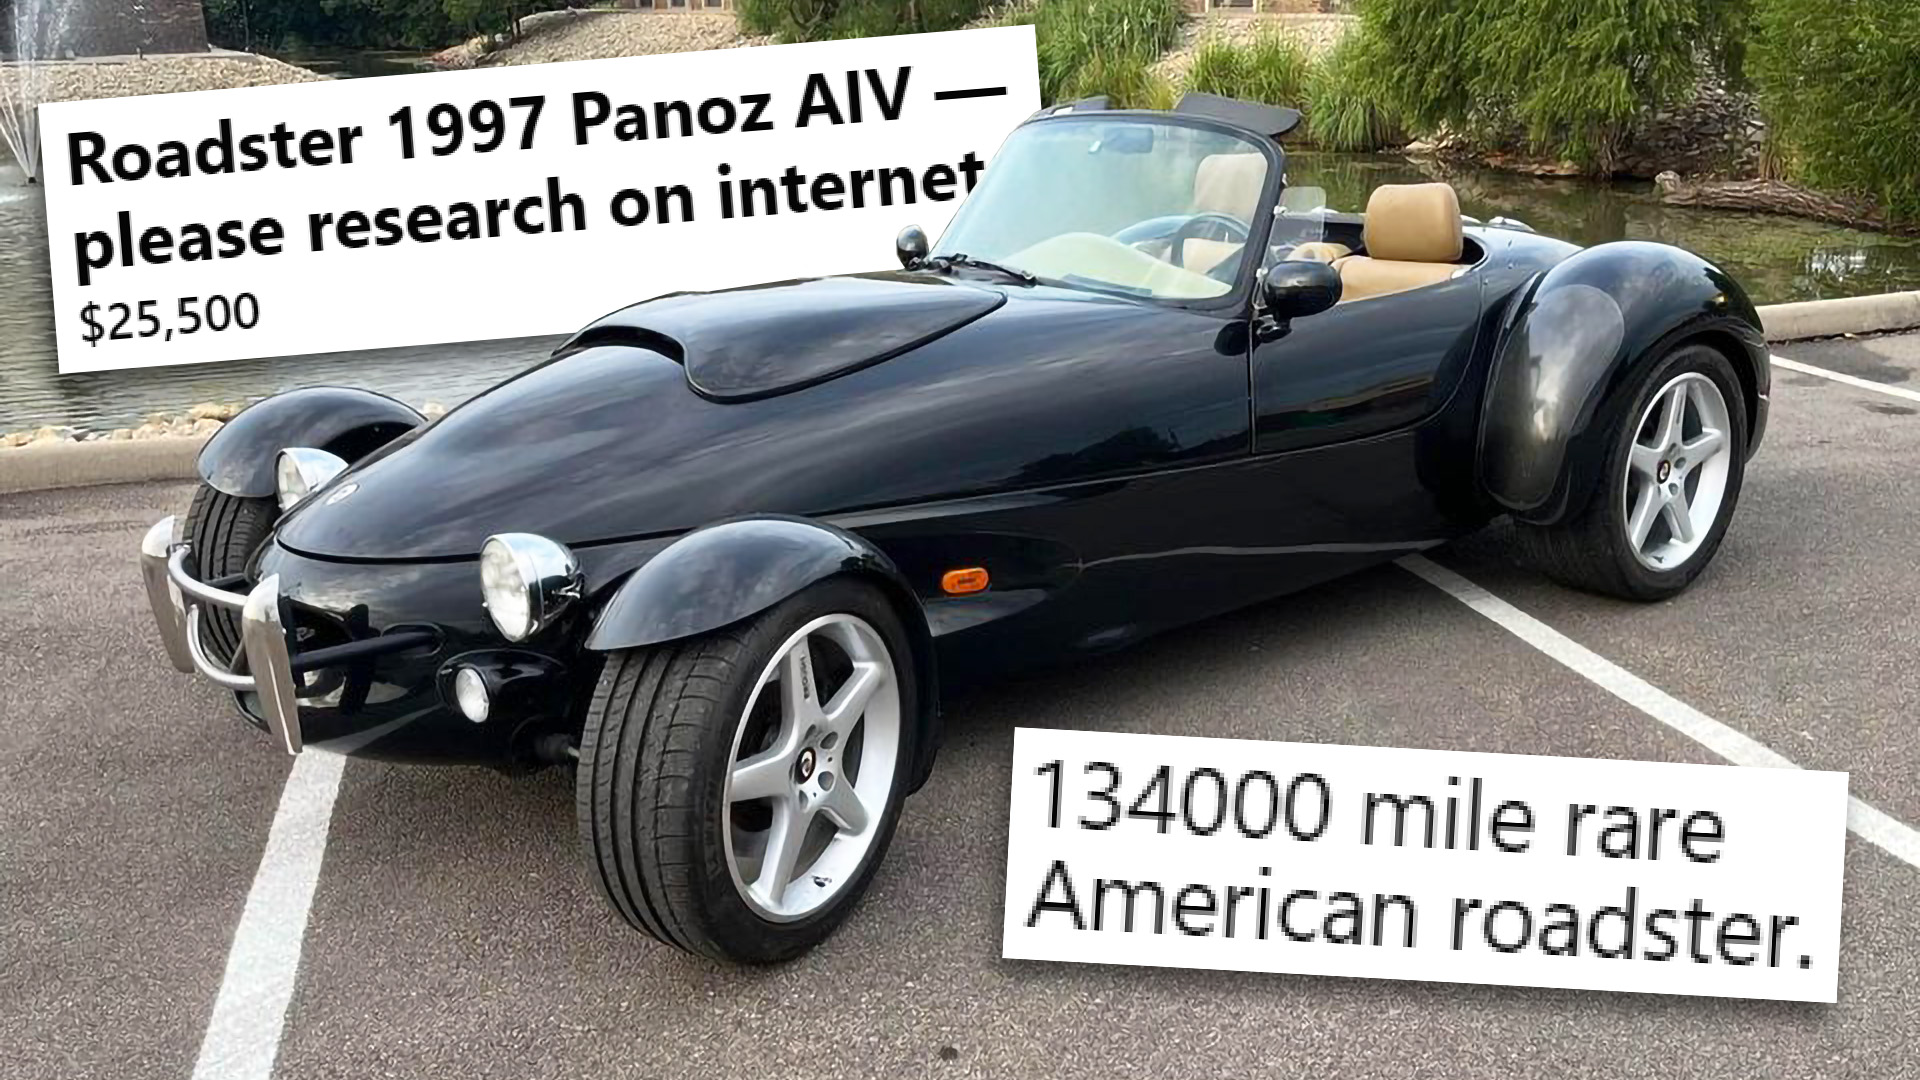 Risky Buy of the Day: Highest-Mileage Panoz AIV Roadster in the World